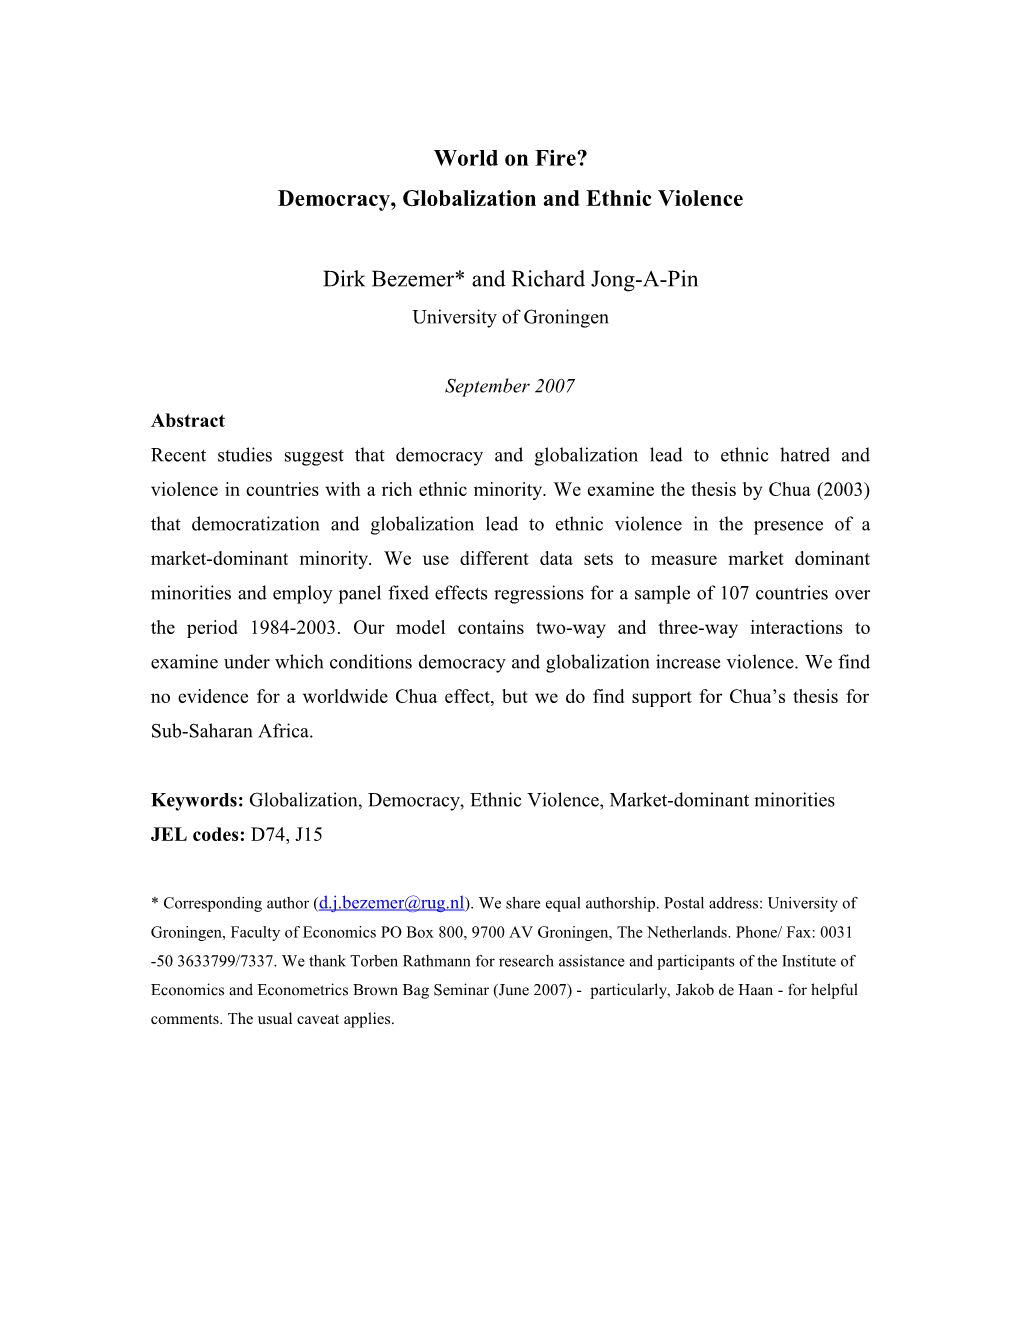 Globalization, Democracy and Ethnic Violence